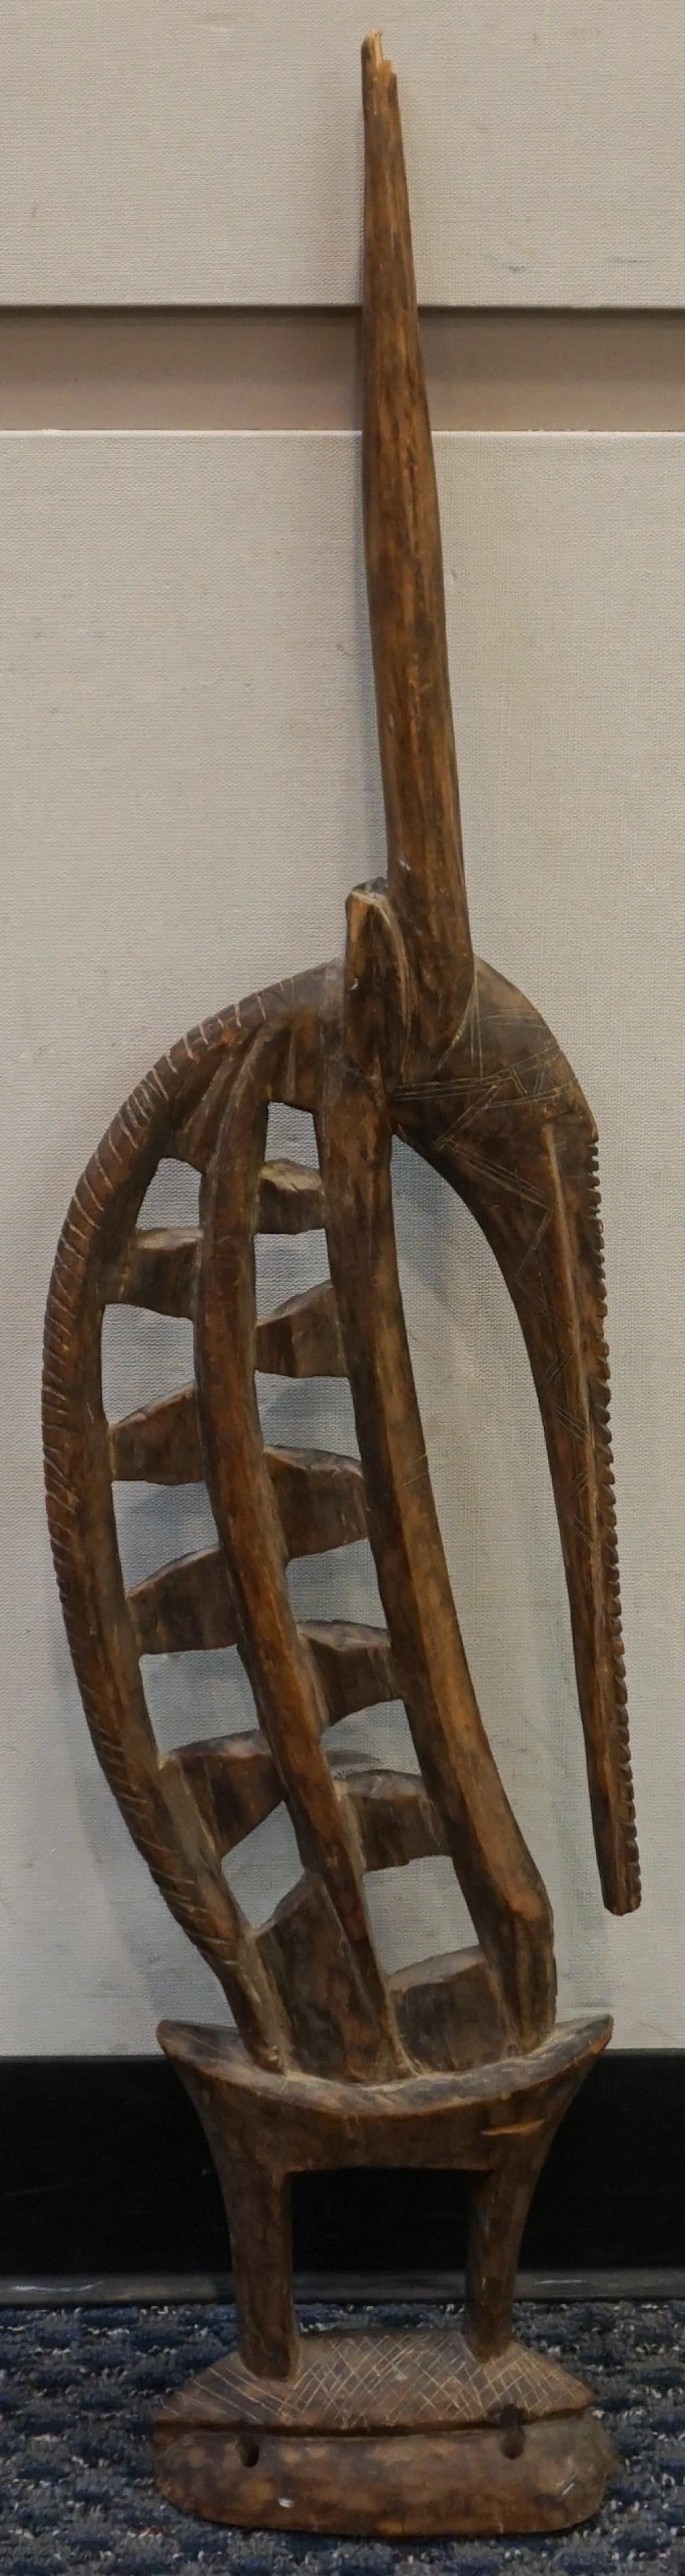 WEST AFRICAN CARVED WOOD CHIWARA 2e4d87